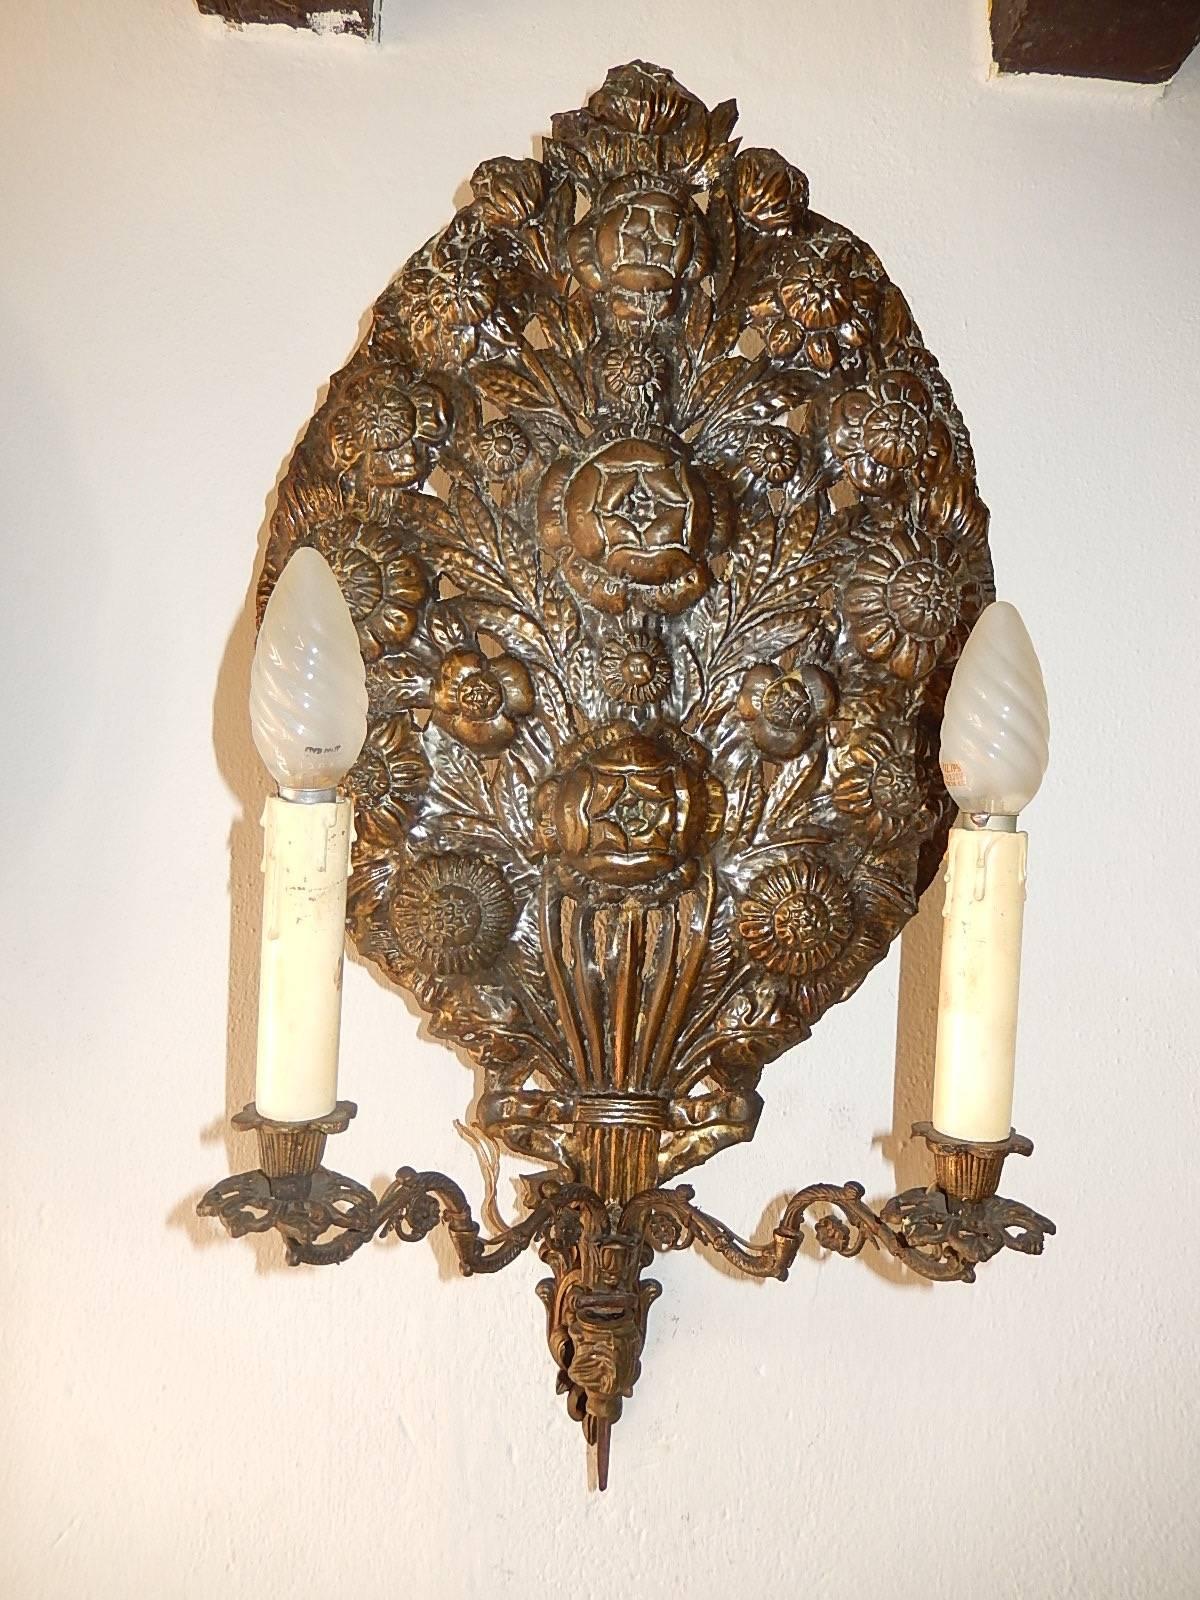 Housing two lights each. Copper palms are much darker due to patina then shows in photos. Sconces are bronze. Excellent condition. These were made for churches in Europe. Re-wired and ready to hang. Free priority shipping from Italy.